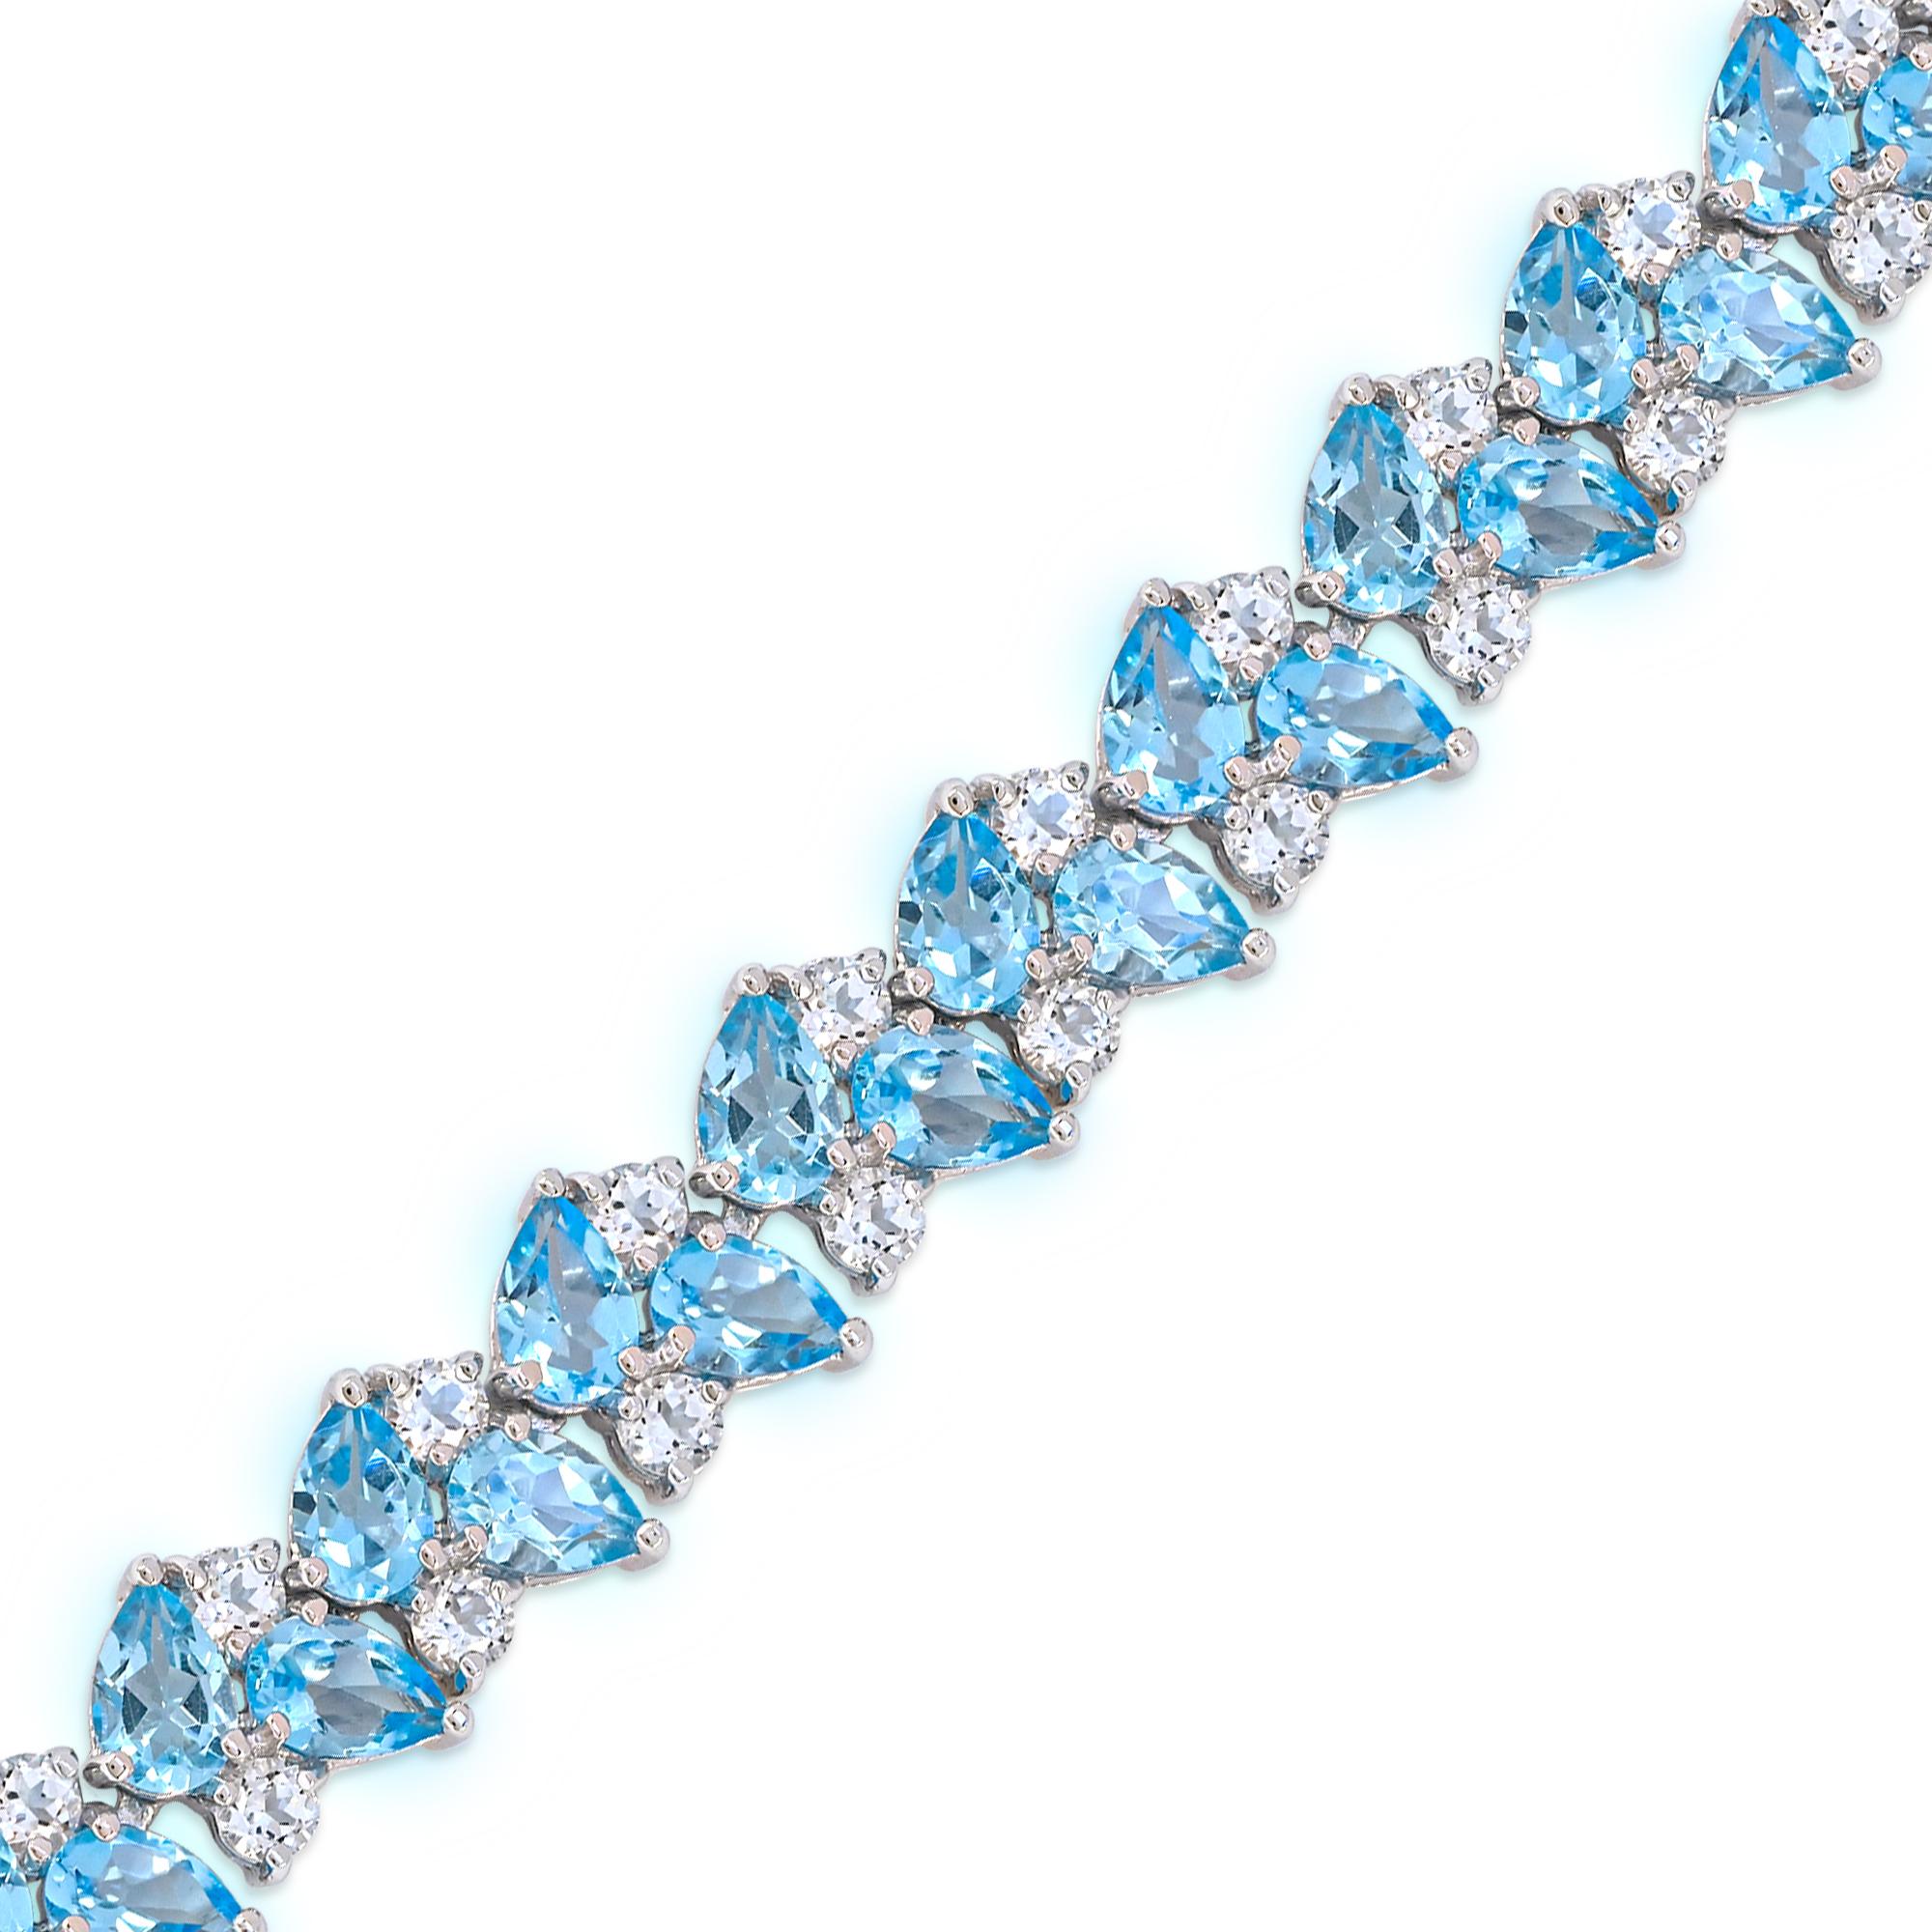 Indulge in the elegance of our Swiss Blue and White Topaz in Sterling Silver. Crafted with meticulous attention to detail, this bracelet boasts a stunning combination of 46 pieces of pear-cut Swiss blue topaz accented by 46 pieces of shinning round